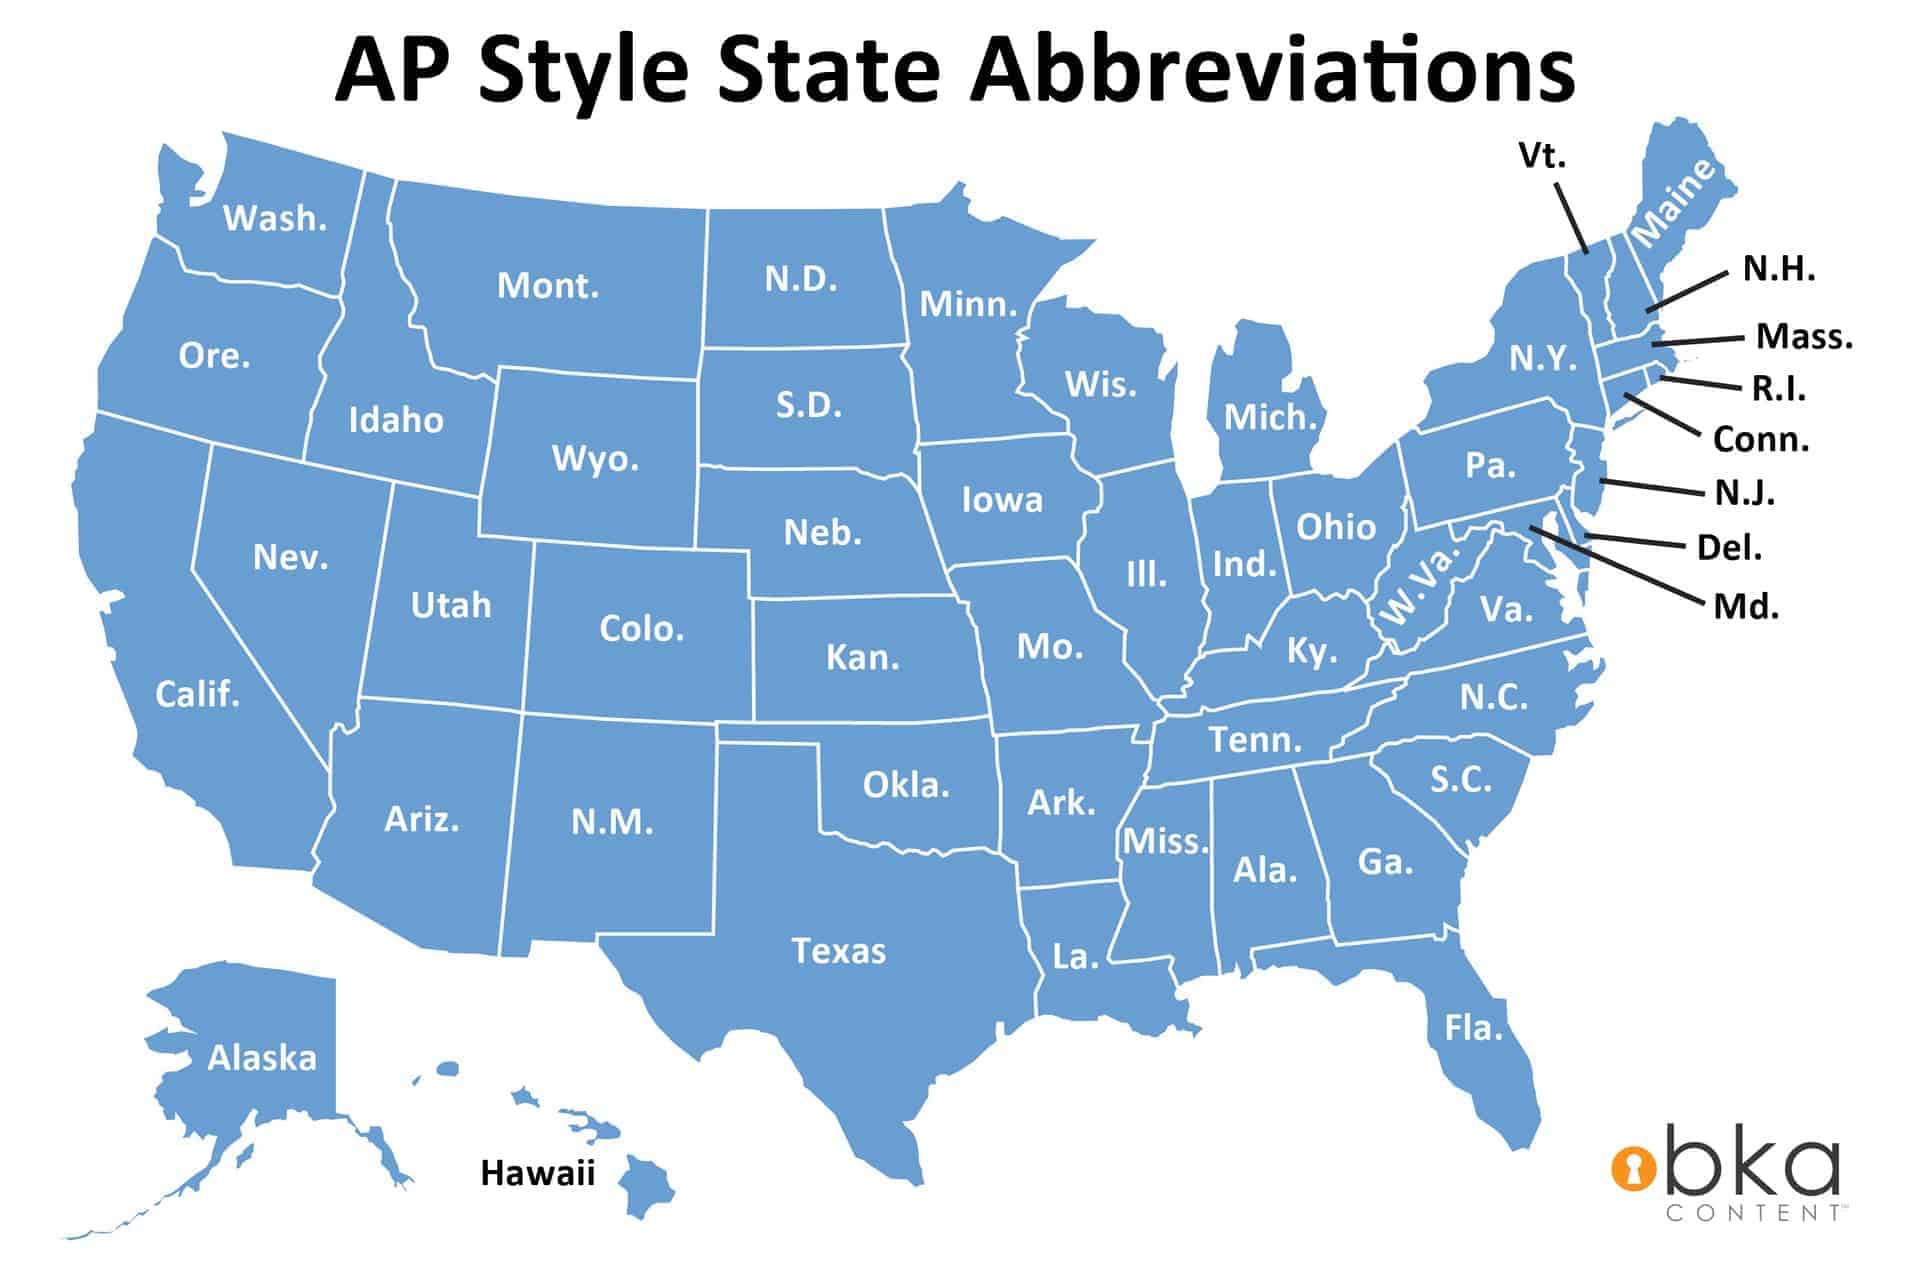 AP Style: State Name Abbreviations